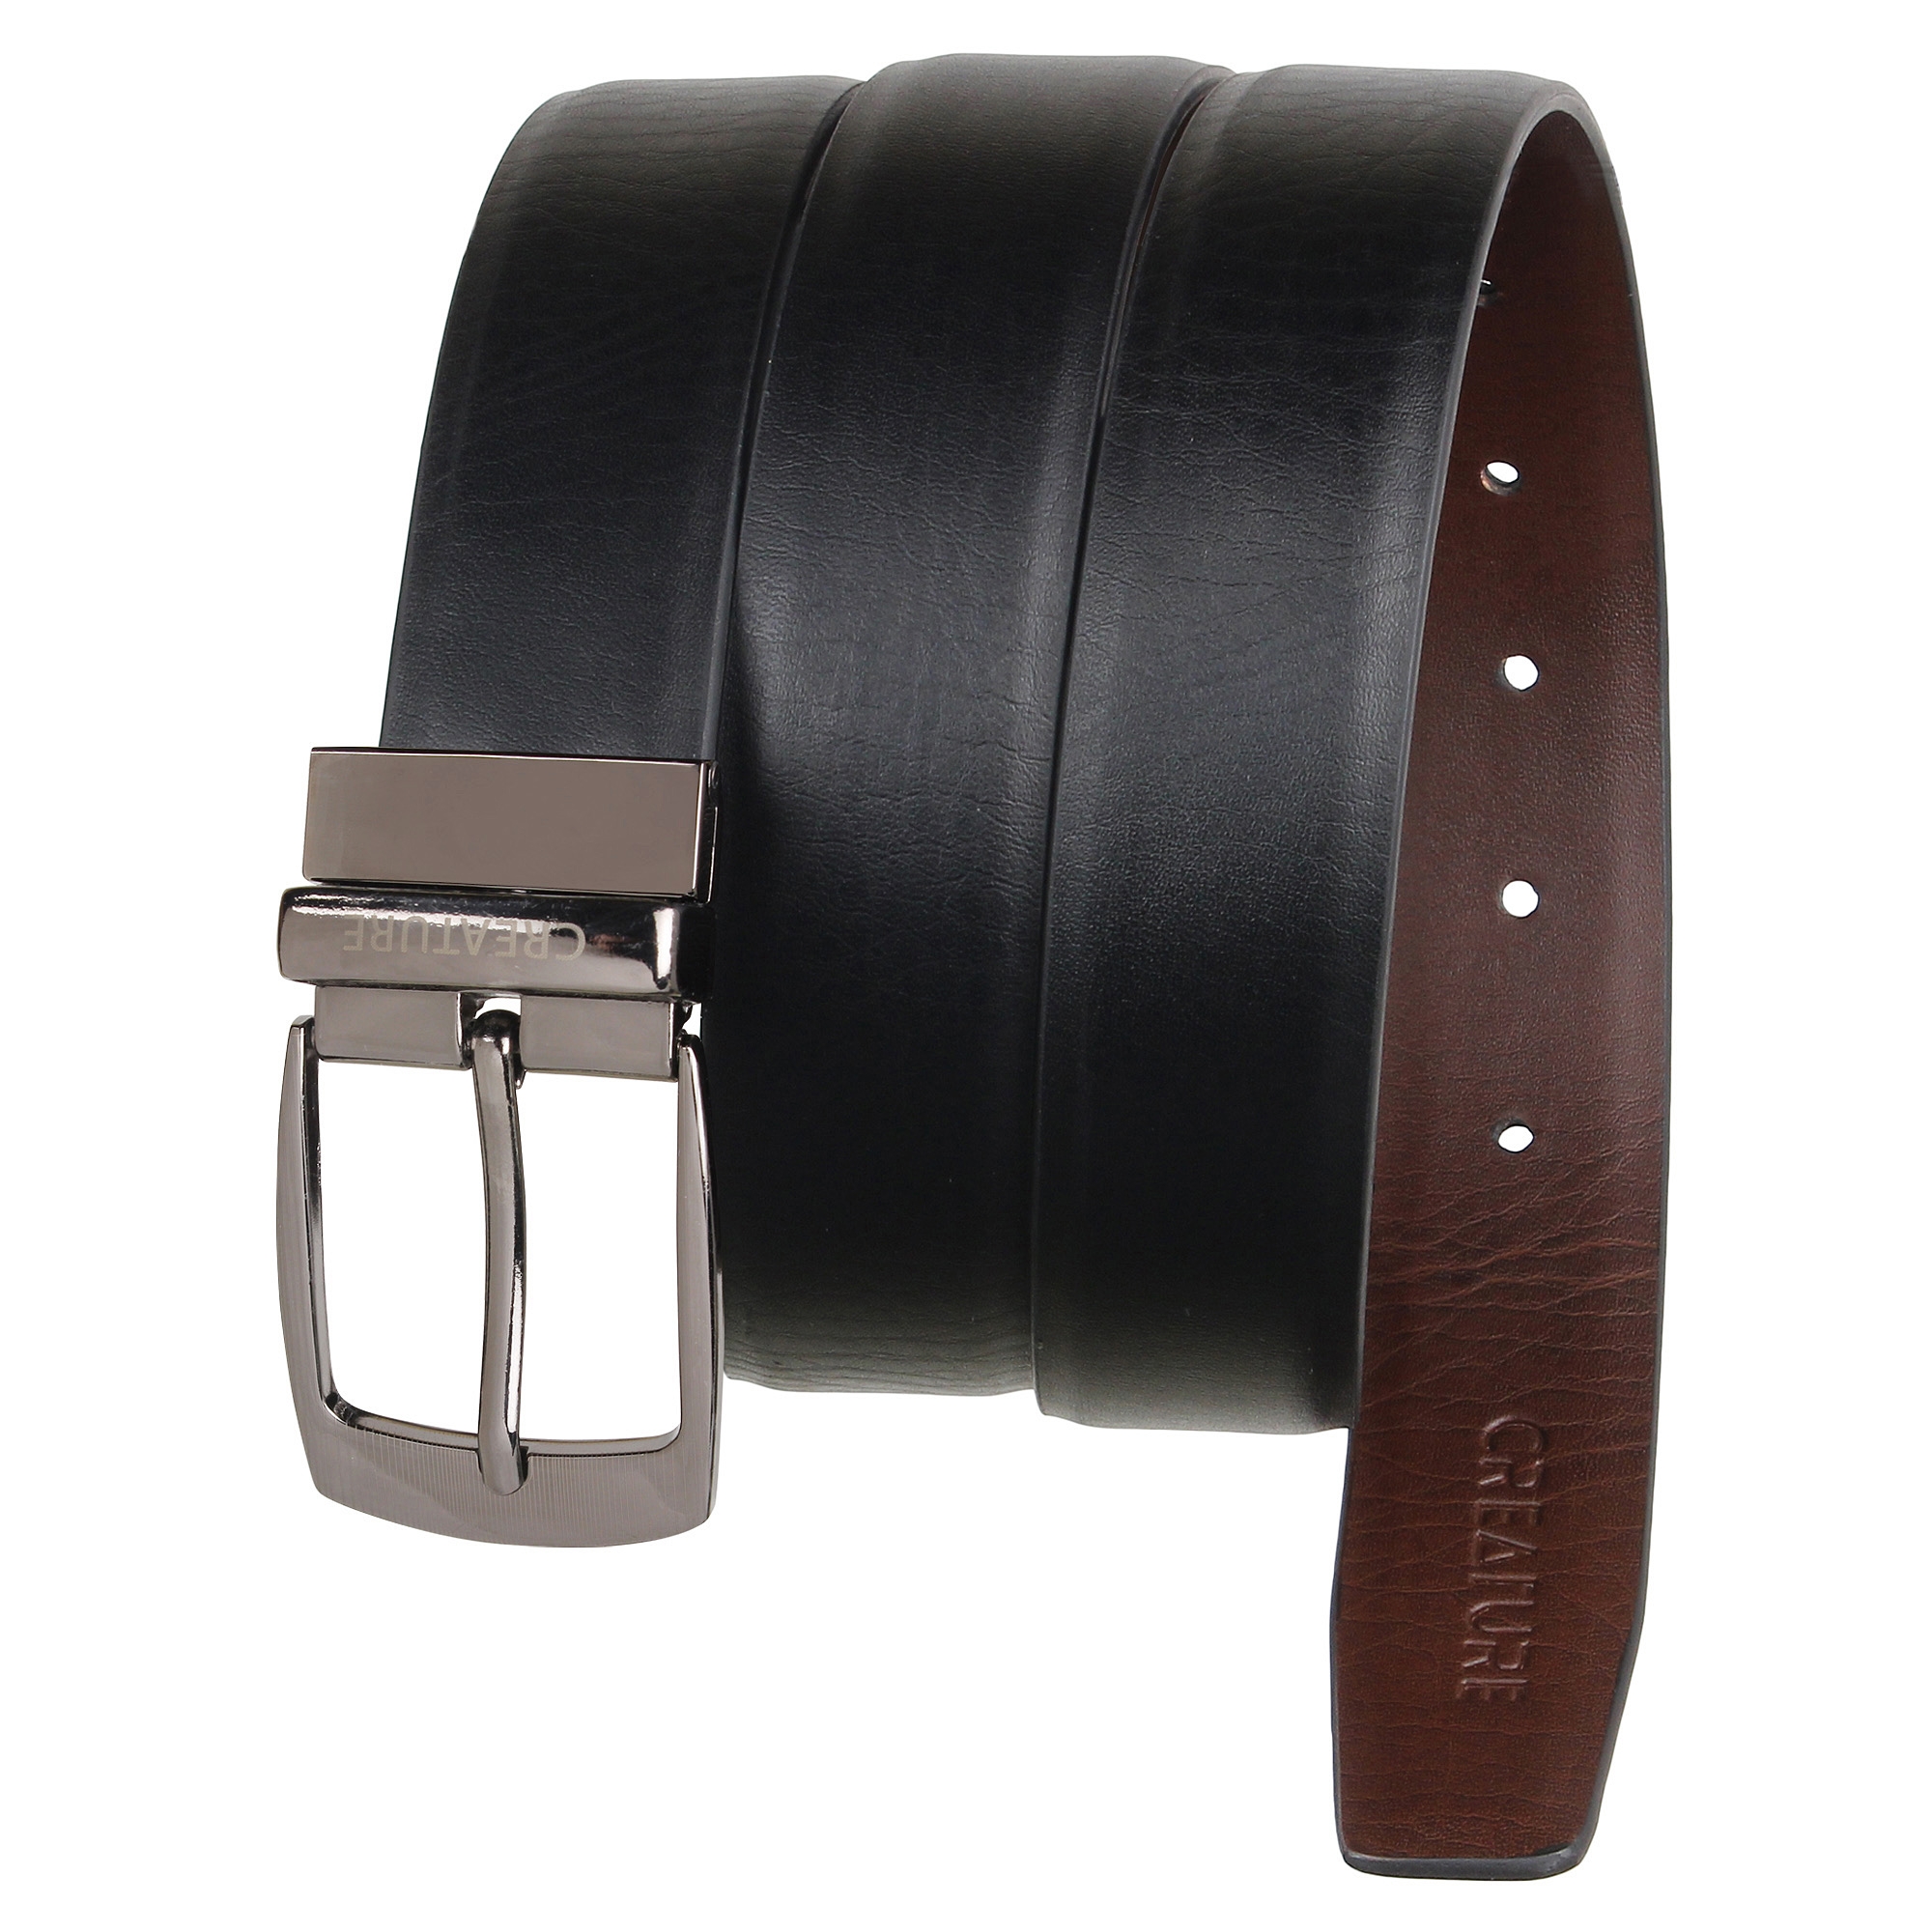 CREATURE | Creature Reversible Faux Leather Black and Brown Casual Belt for Men